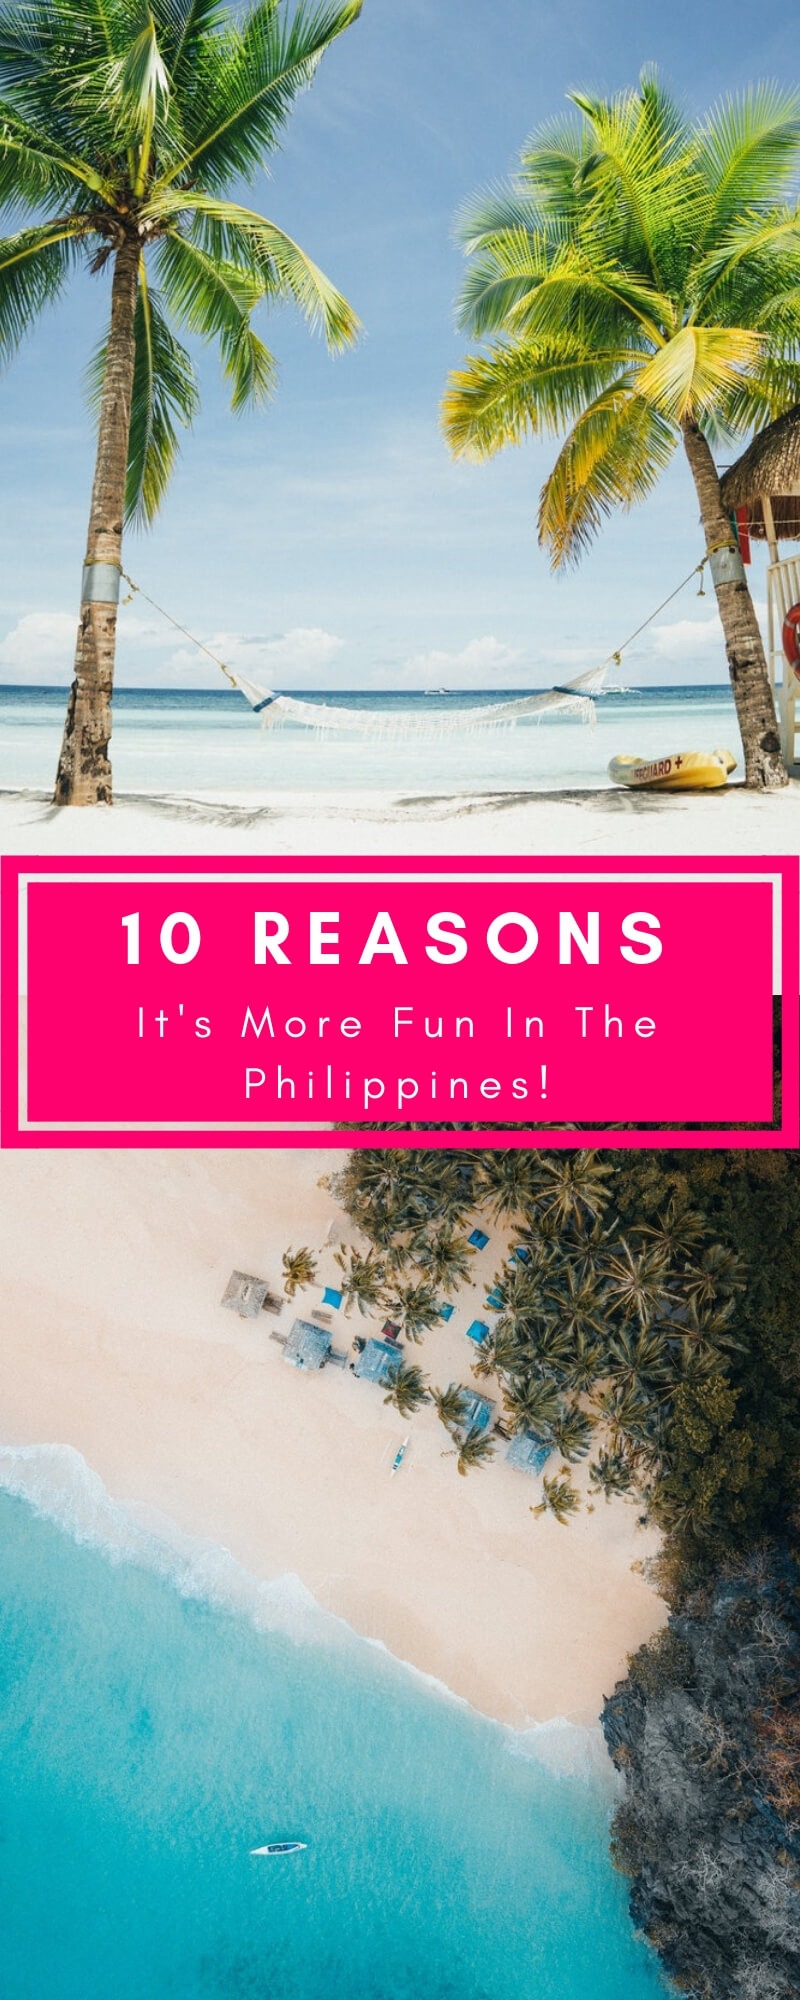 Why is it 'more fun in the Philippines'? Here are the top 10 reasons why tourists just keep coming back to the Philippines and why you should start planning your own trip now!